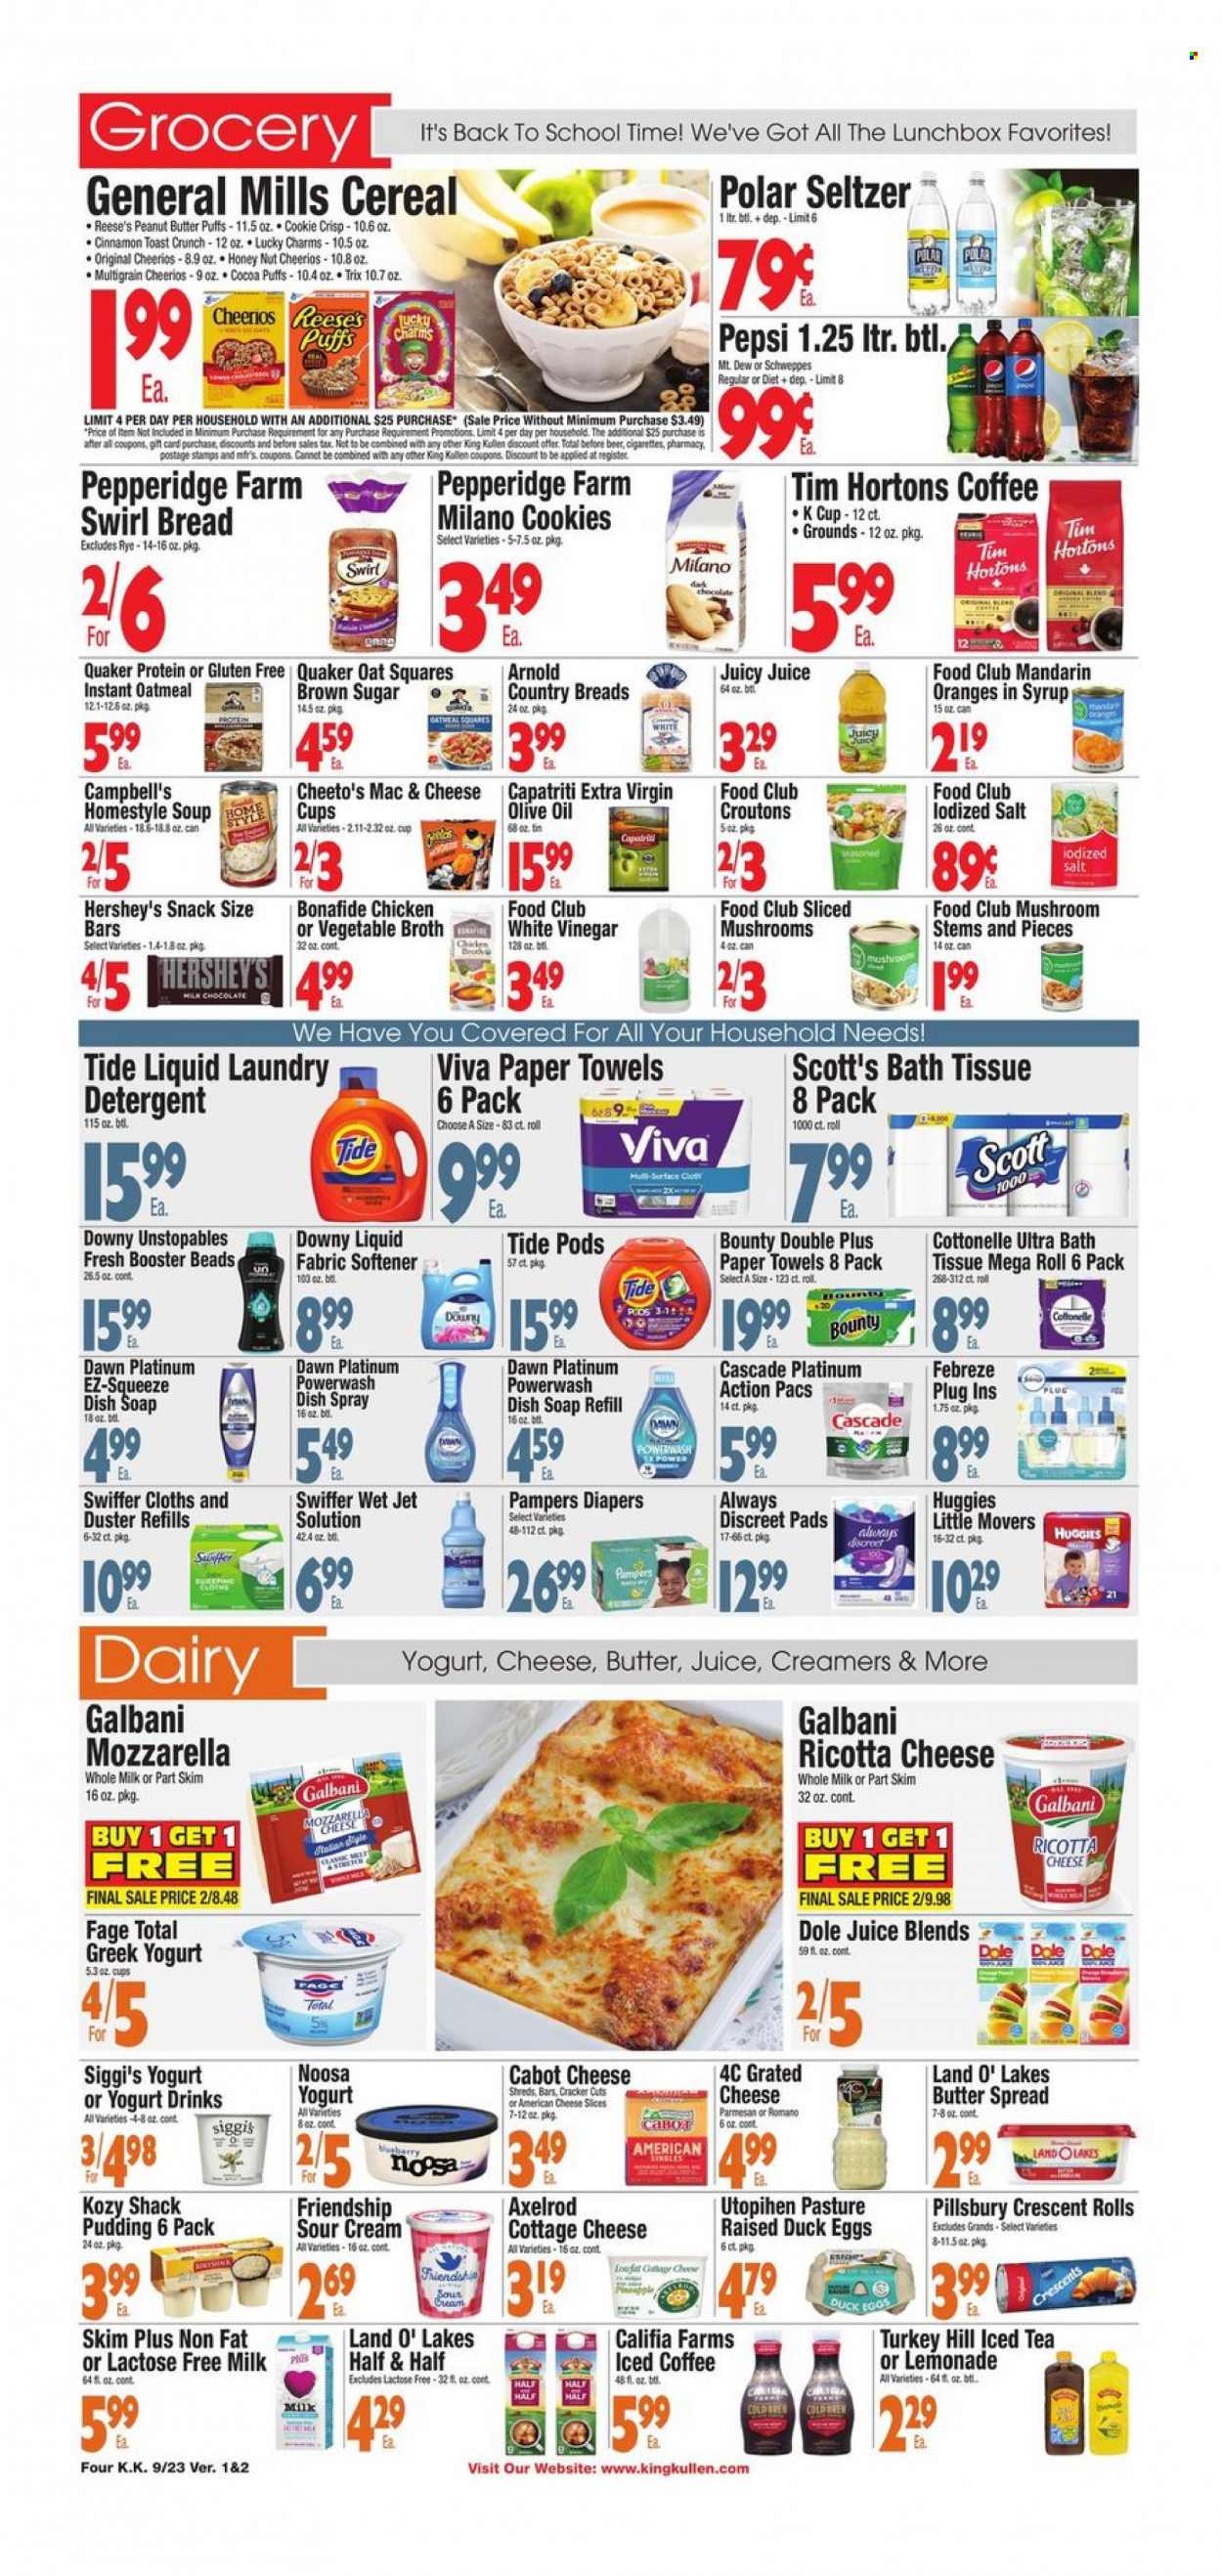 thumbnail - King Kullen Flyer - 09/23/2022 - 09/29/2022 - Sales products - mushrooms, bread, crescent rolls, puffs, Dole, mandarines, oranges, Campbell's, soup, Pillsbury, Quaker, american cheese, cottage cheese, mozzarella, ricotta, sliced cheese, parmesan, grated cheese, Galbani, greek yoghurt, pudding, yoghurt, milk, lactose free milk, yoghurt drink, eggs, sour cream, Reese's, Hershey's, cookies, chocolate, snack, Bounty, crackers, croutons, chicken broth, oatmeal, broth, cereals, Cheerios, Trix, cinnamon, extra virgin olive oil, vinegar, olive oil, oil, peanut butter, lemonade, Schweppes, Pepsi, juice, ice tea, seltzer water, iced coffee, coffee capsules, K-Cups, beer, Huggies, Pampers, nappies, bath tissue, Cottonelle, Scott, kitchen towels, paper towels, detergent, Febreze, Swiffer, Cascade, Tide, Unstopables, fabric softener, laundry detergent, Downy Laundry, Jet, soap, sanitary pads, Always Discreet, meal box, Half and half. Page 4.